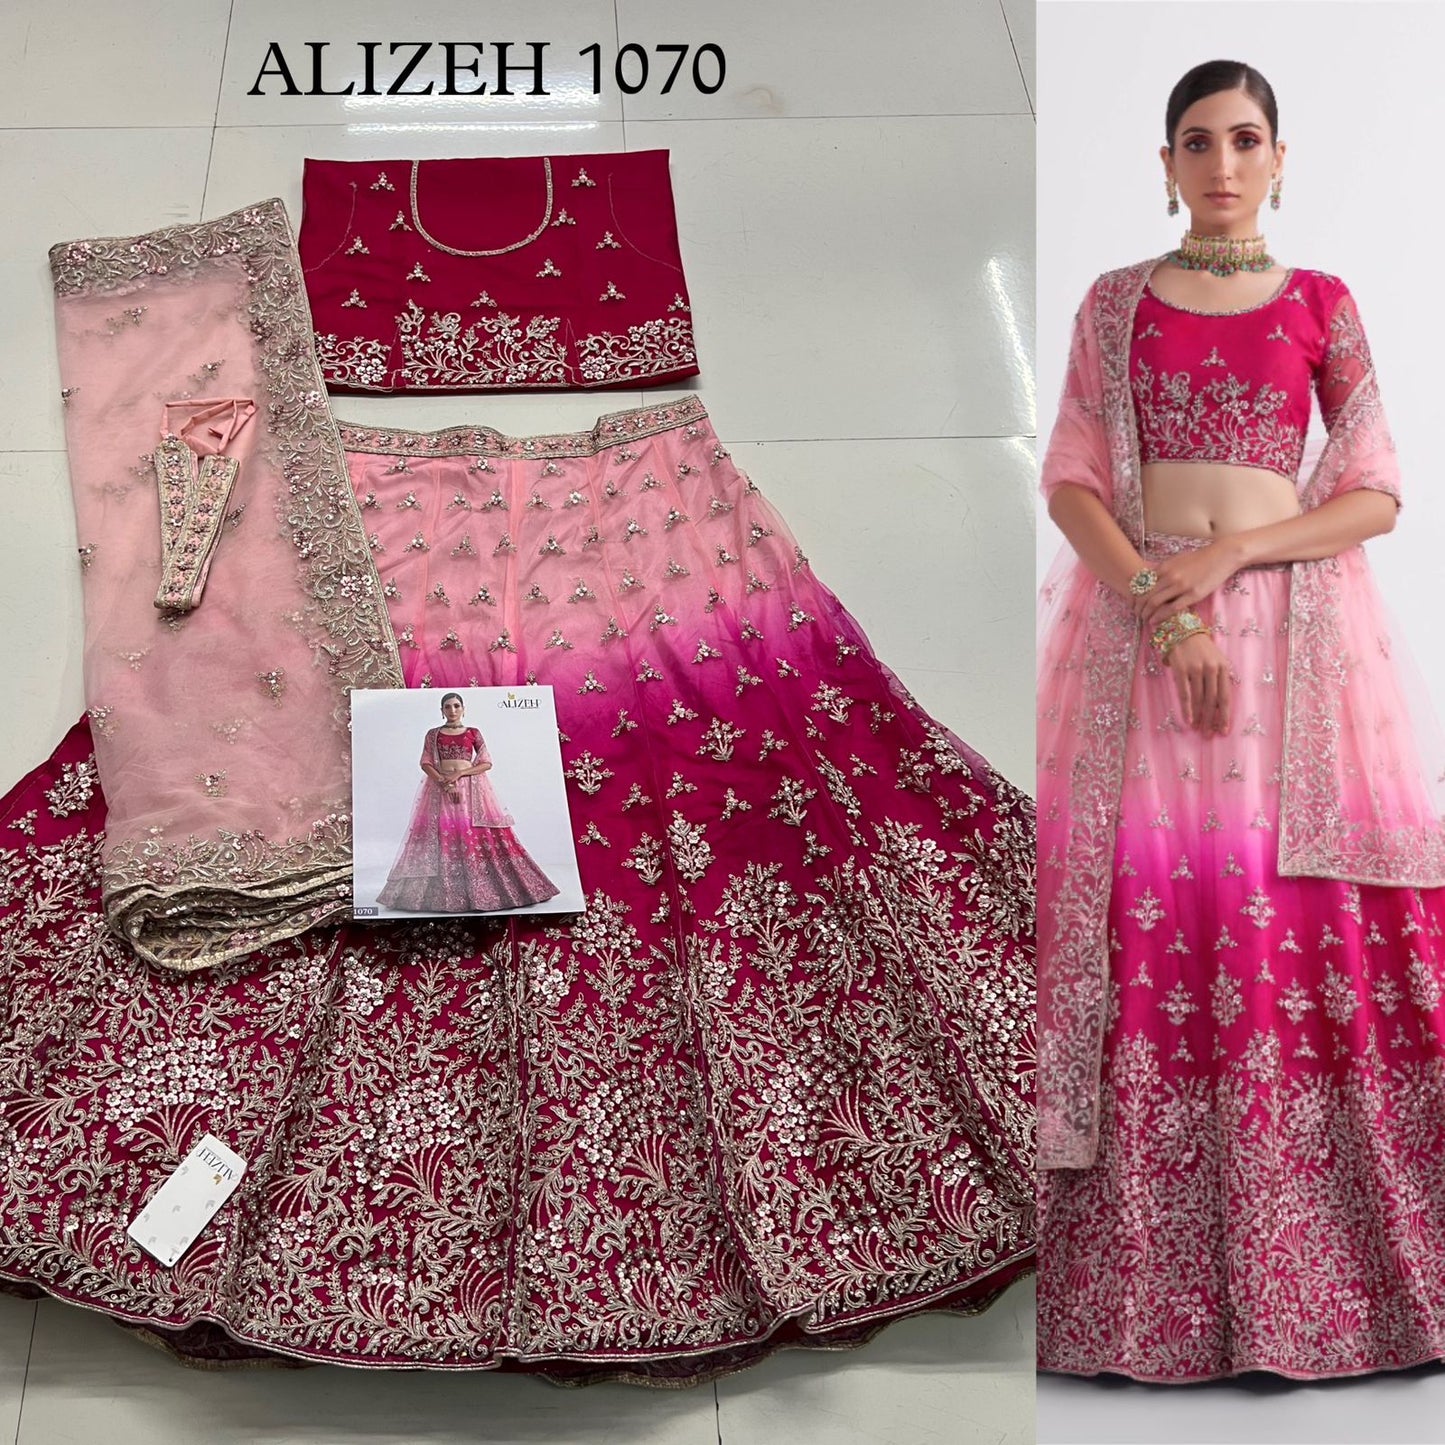 Net Lehenga with Blouse | 44-inch bust